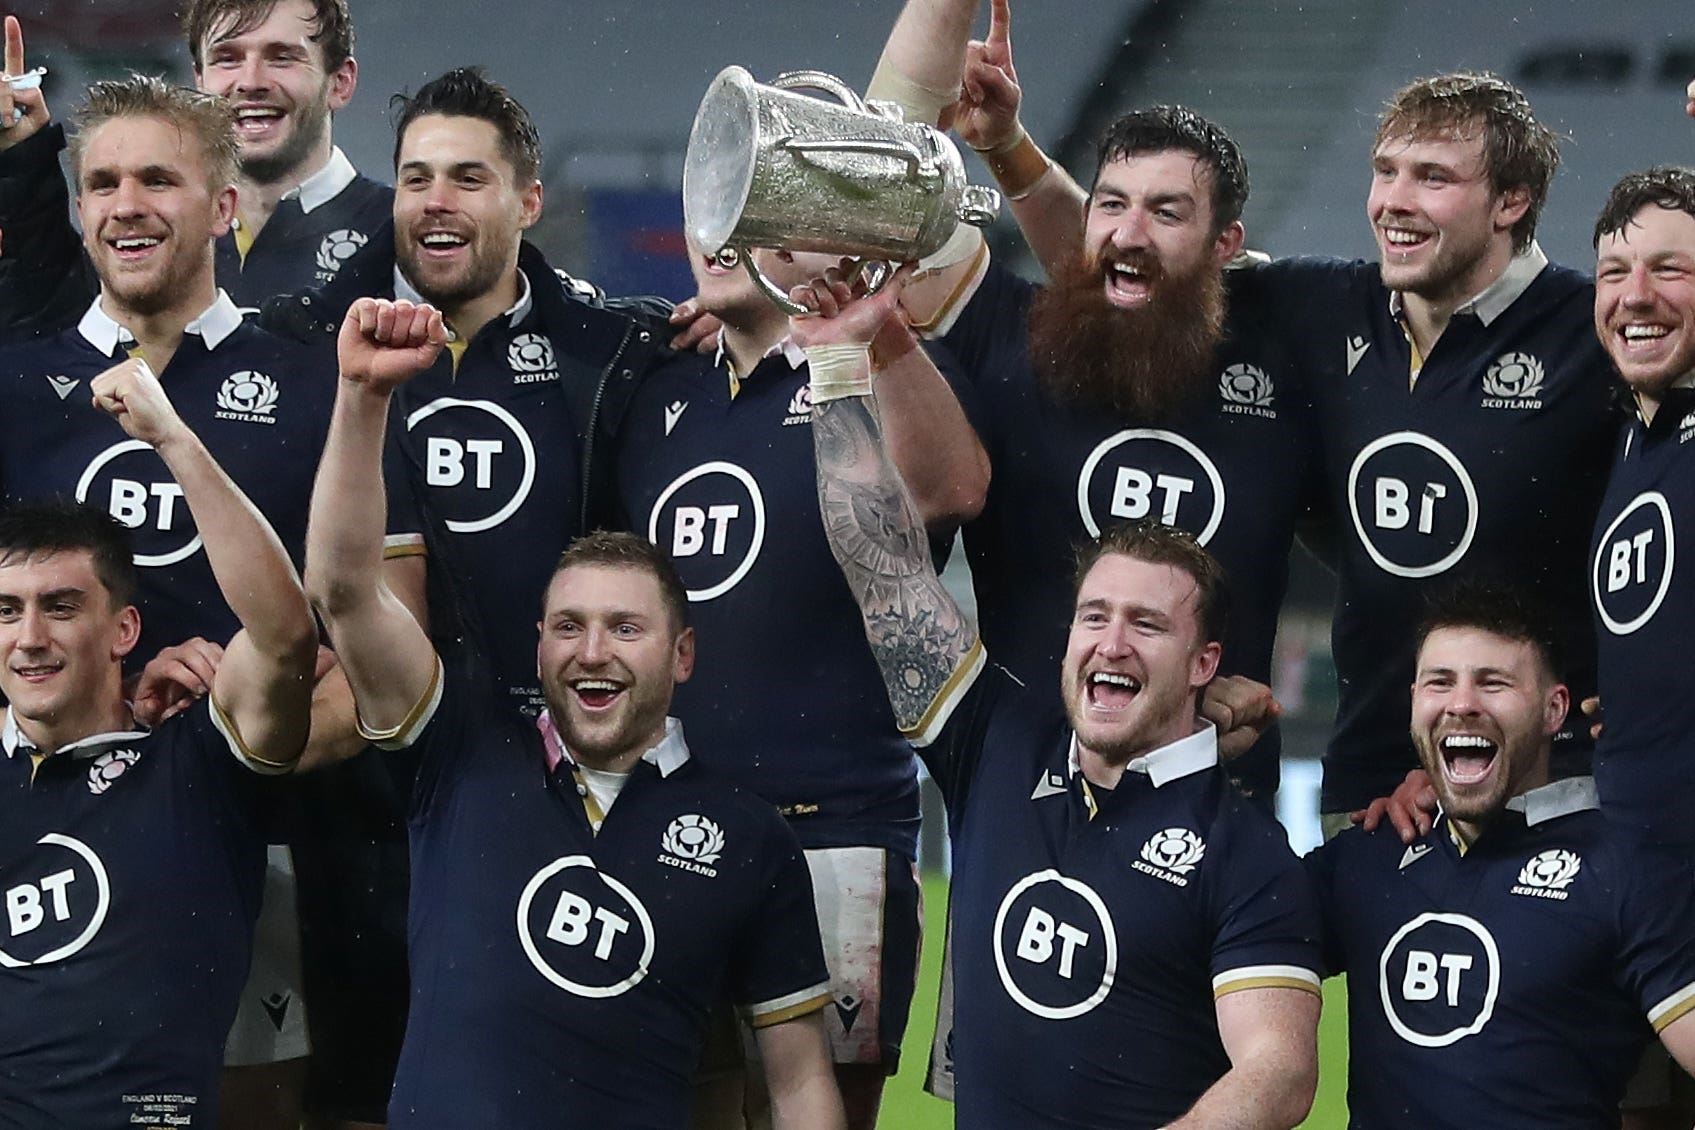 Scotland rugby team have ‘quieter celebration’ after Calcutta Cup victory